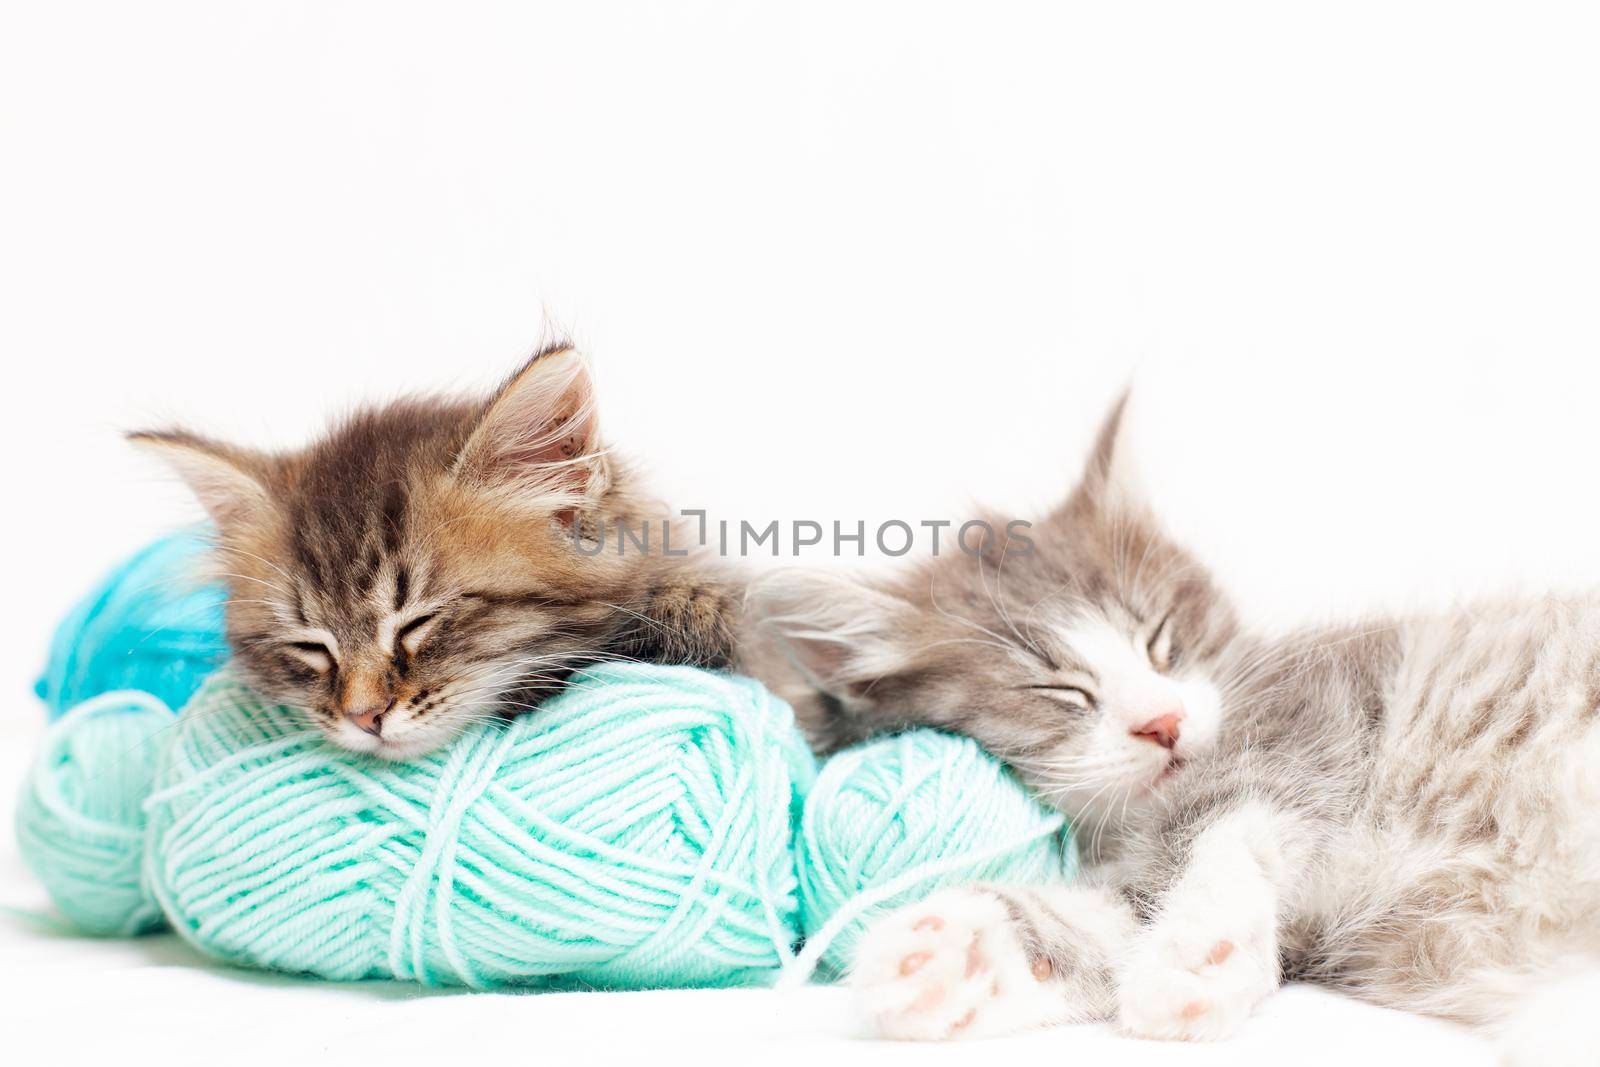 Striped cat with blue balls, skeins of thread on a white bed. An article about kittens. An article about pets. A curious little kitten sleeping over a white blanket